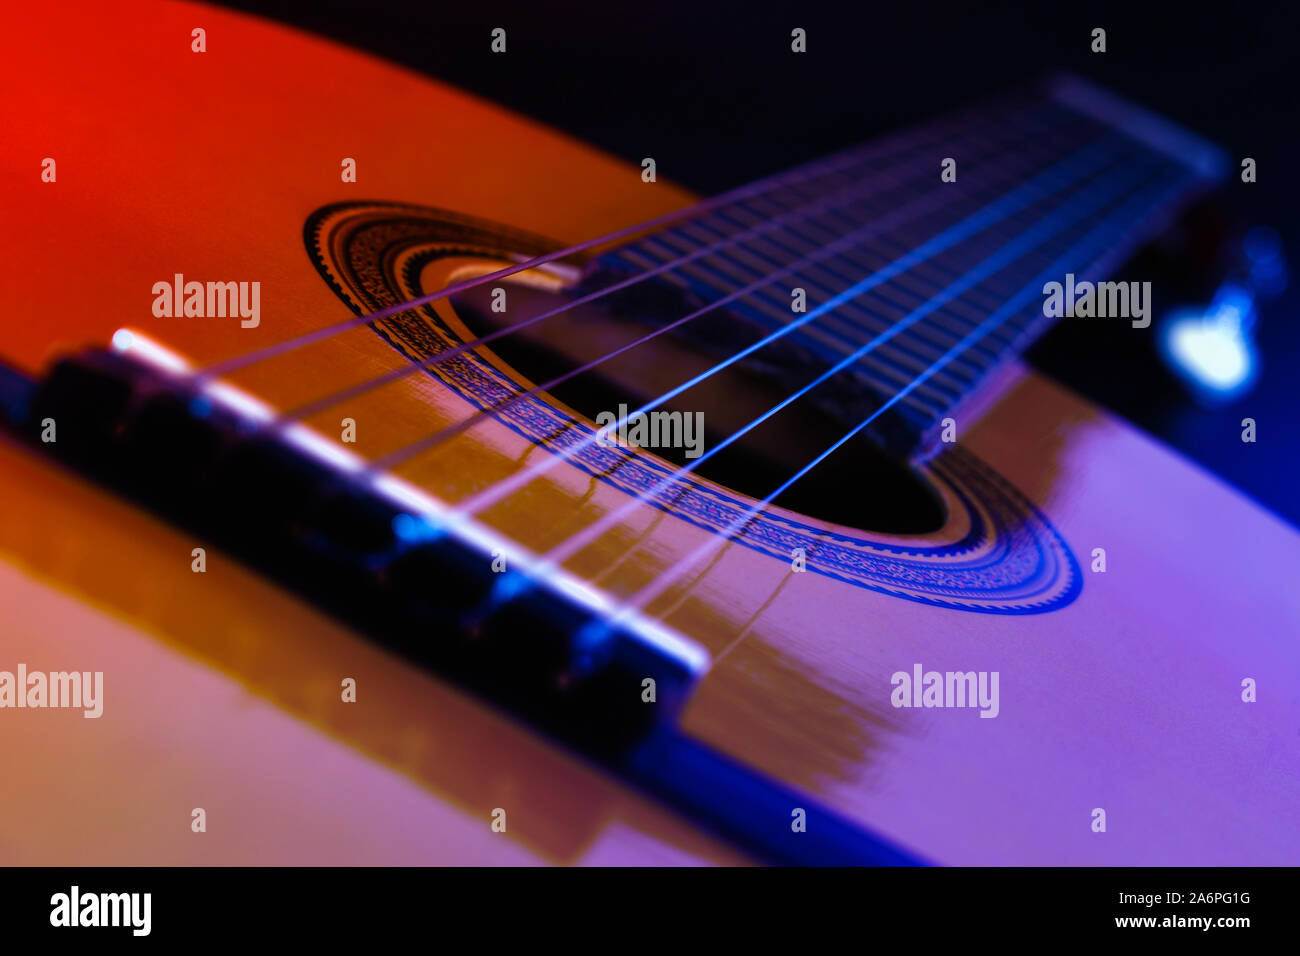 Guitar backlit with colorful highlights, close-up with shallow depth of field. Stock Photo